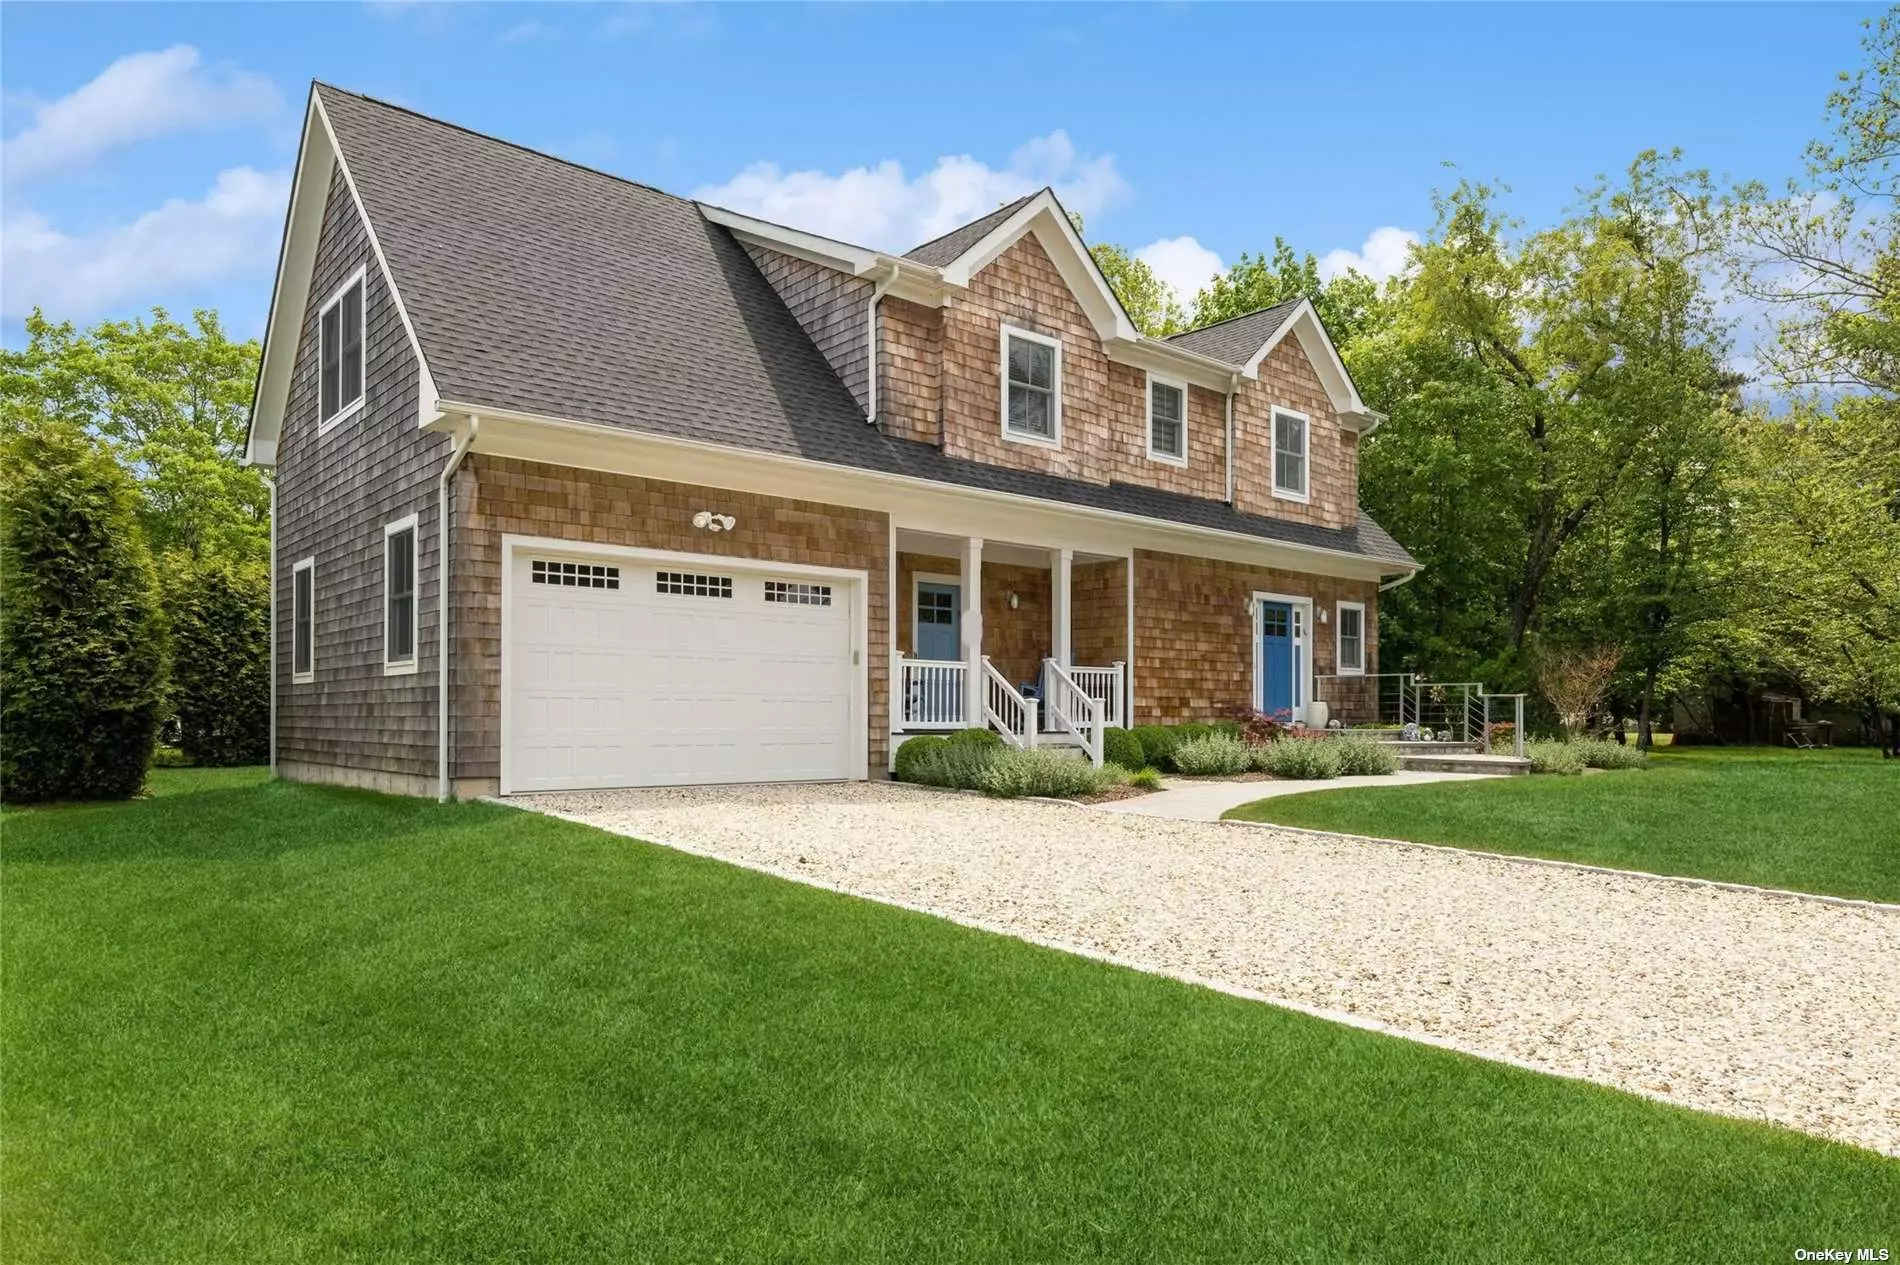 Built Ground-Up in 2018. This 4 Bedroom, 2.5 Bath Beach House Offers Luxury Upgrades From Top To Bottom! Steps to Bay Beach At End Of Street And 1 Mile To Greenport Village. Beautiful Landscaping and Privacy Trees Surround A Low-Maintenance Backyard With Large Patio. Keep Your Boat In Full Service Sterling Harbor Marina And Enjoy Restaurants Nearby. House Features Open Kitchen With Luxury Custom Cabinets, Vanities, And Marble Countertops. Mudroom Has Built Ins, First Floor Laundry, Shiplap And Custom Trim Work. Luxury Appliances GE Cafe, Wine Fridge, White Oak Flooring. Large Primary Bedroom With Huge En-Suite Bathroom. Custom Window Treatments And Closet Systems. A Walk Out And Fully Insulated Easy to Finish Basement. Propane Gas Heating, Cooking, Central Air And Tankless Hot Water. This Home Is Turn Key, Low Maintenance and on Greenport Electric Co. Room for Pool.